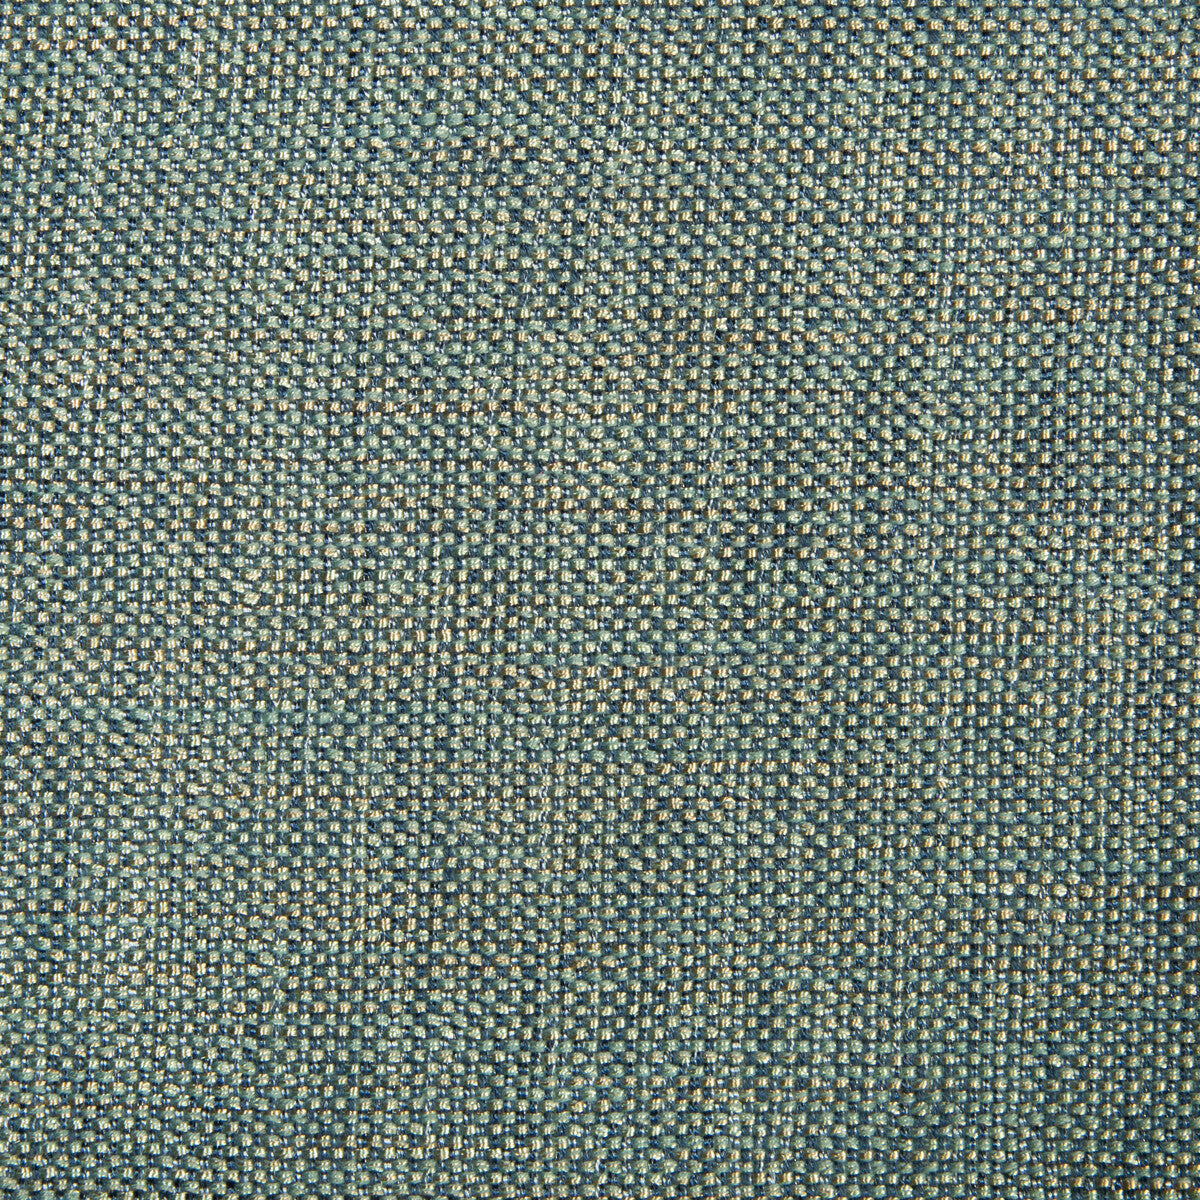 Kravet Contract fabric in 34926-515 color - pattern 34926.515.0 - by Kravet Contract